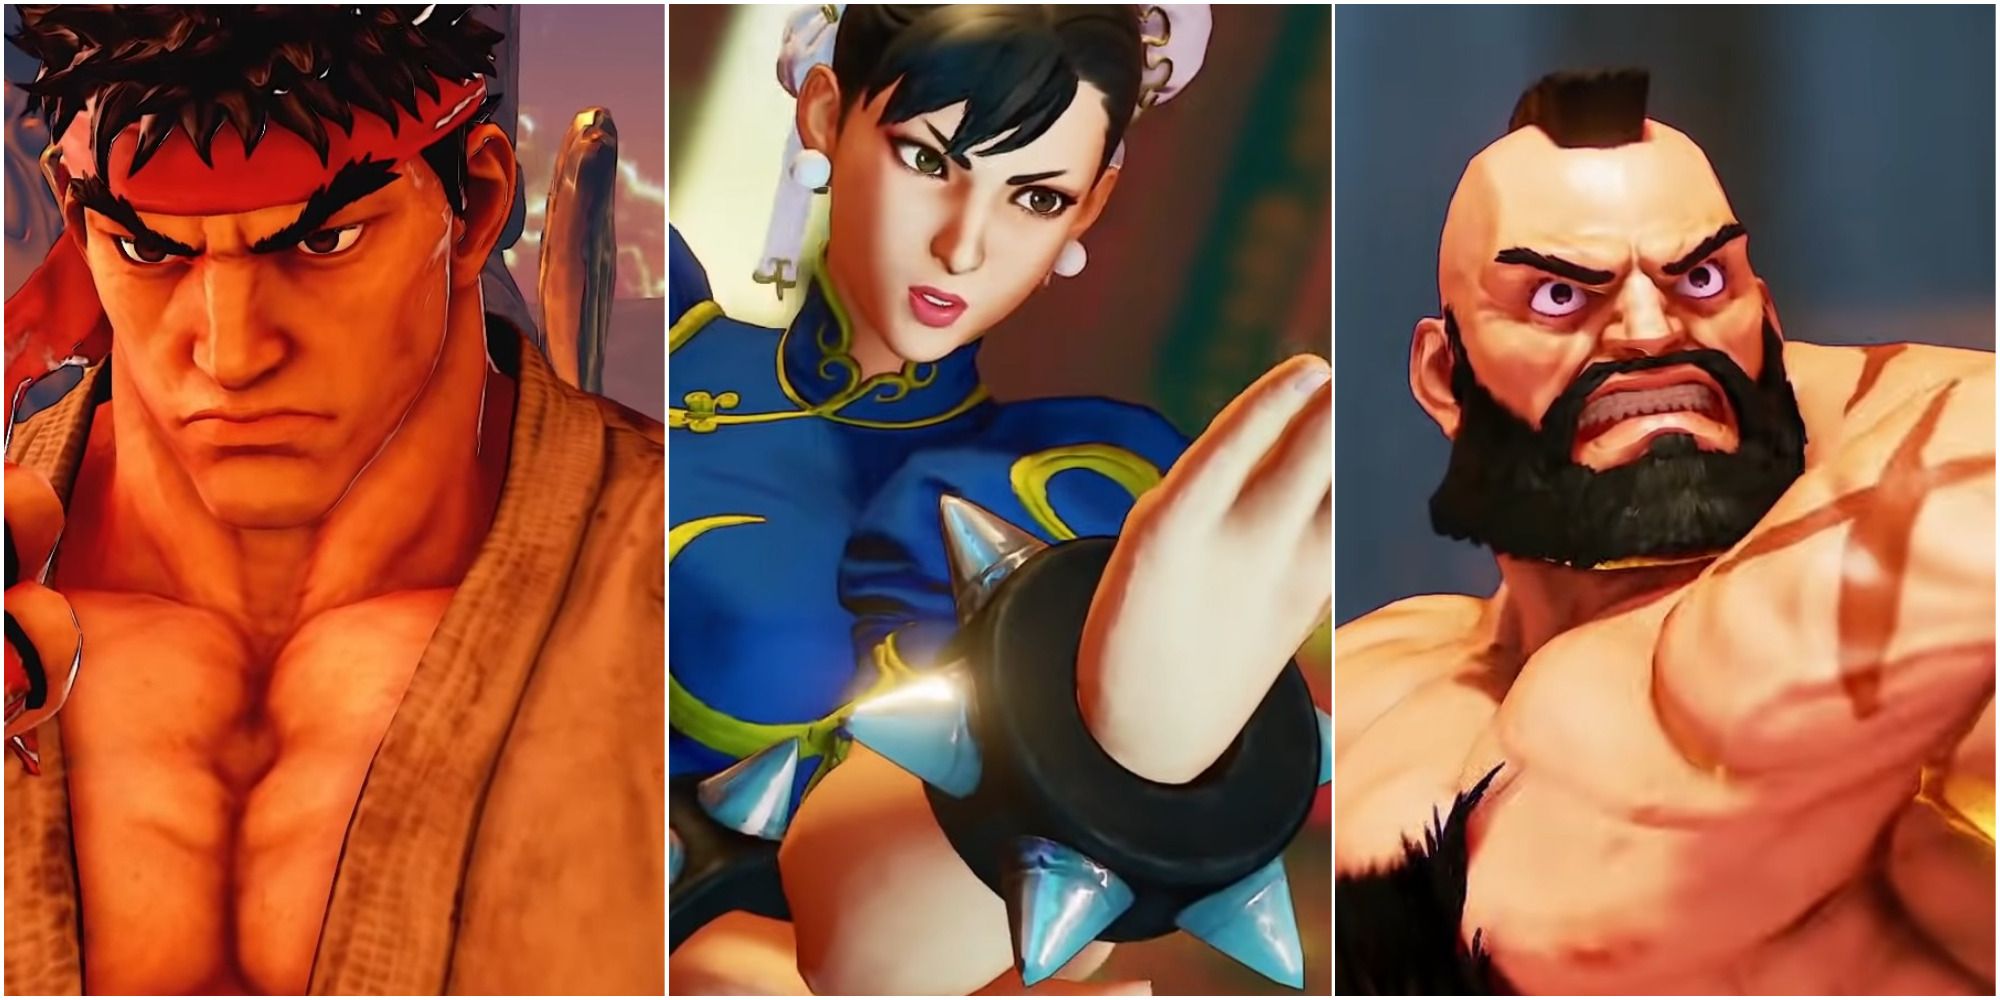 SF2 Characters in SFV Feature Image